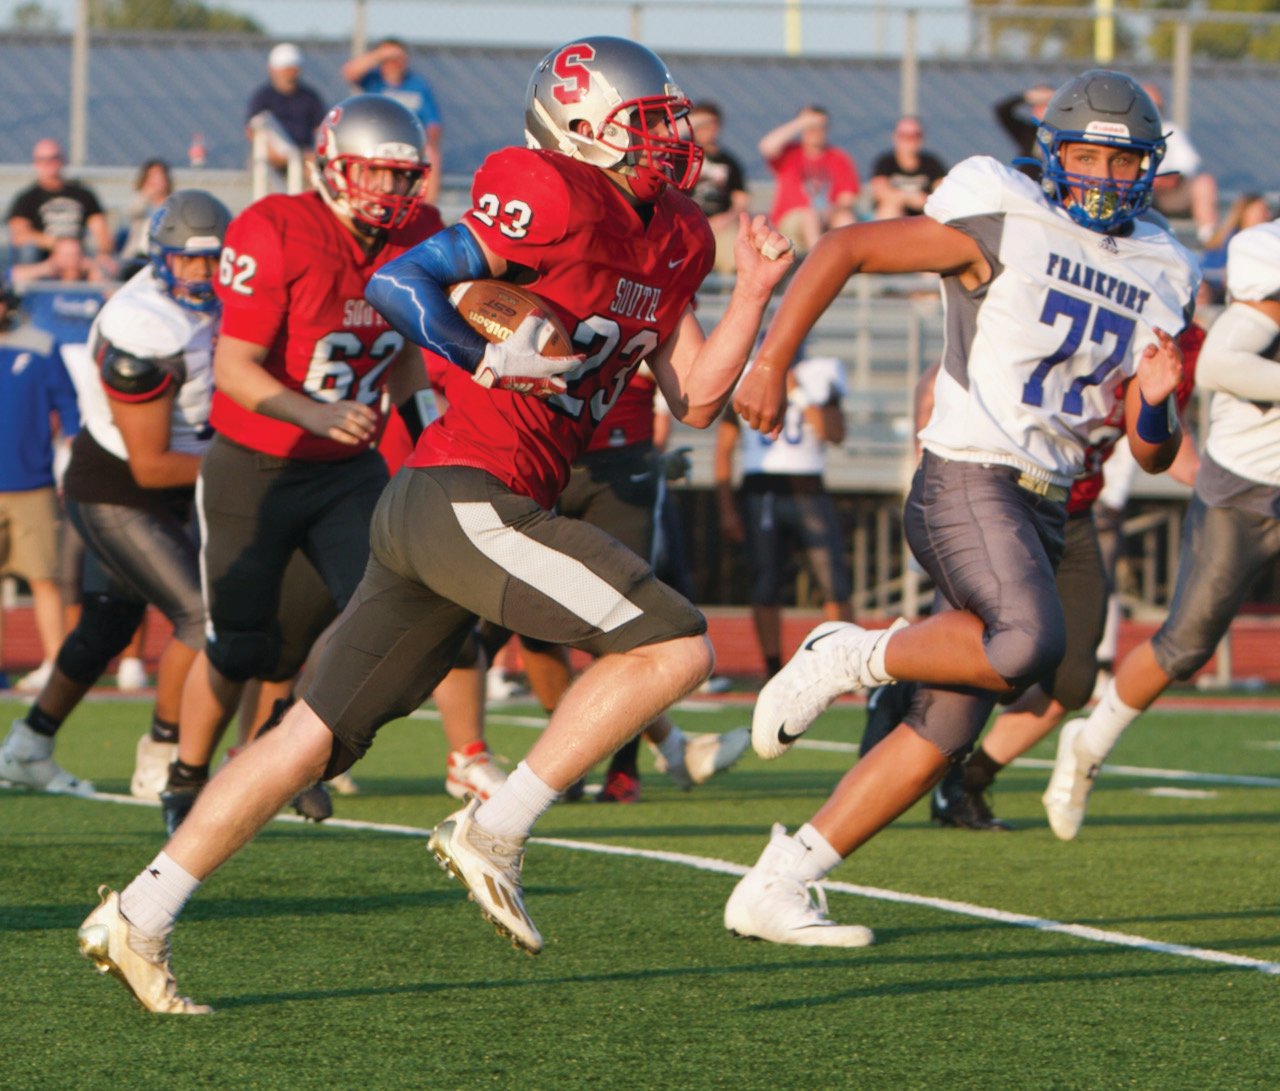 Carson Chadd took the Mounties' first play from scrimmage 73 yards for a touchdown against Frankfort on Friday night.